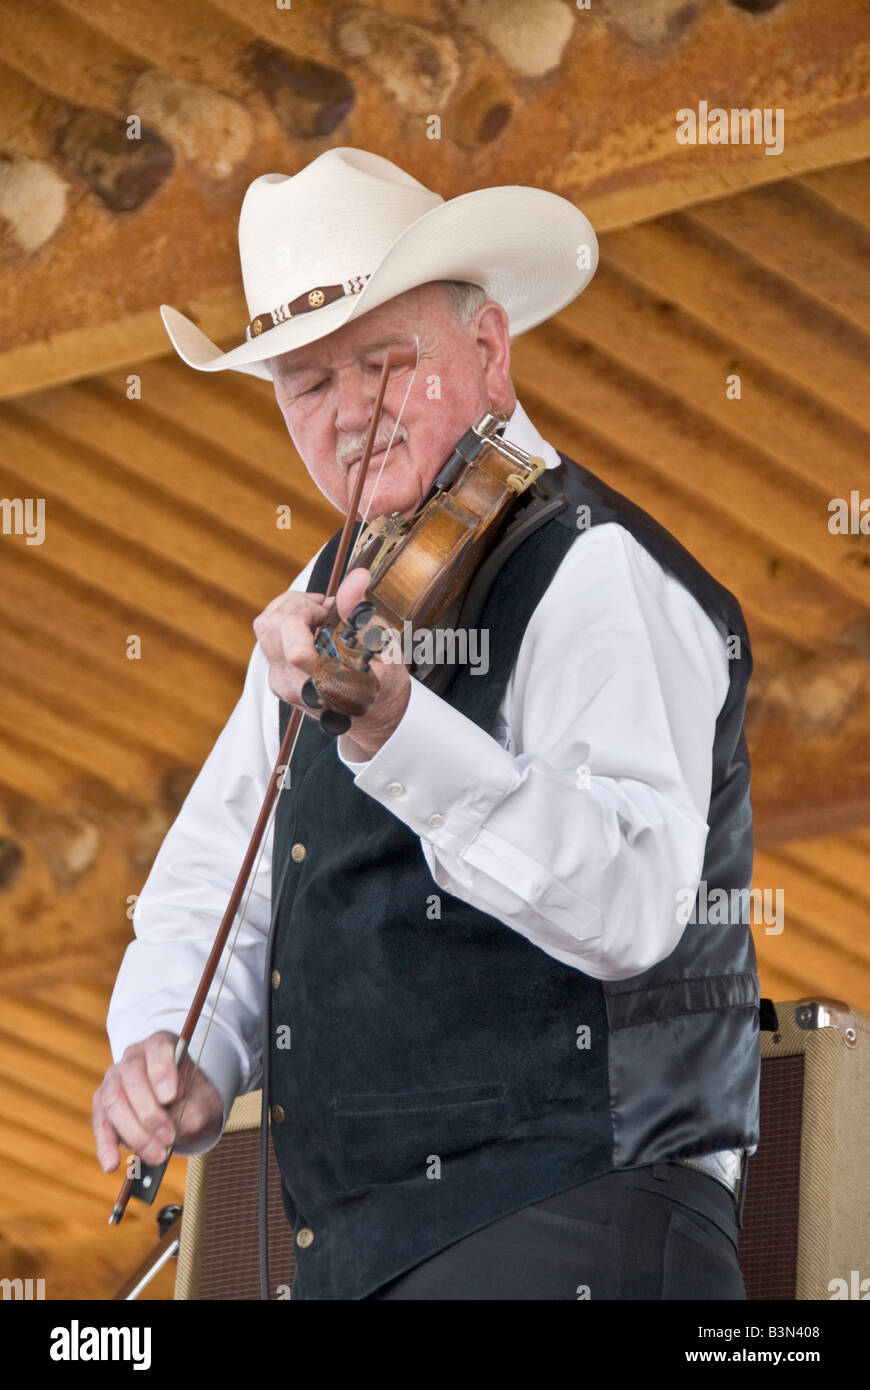 Texas Turkey annual Bob Wills Day celebration Texas Playboys western swing band in concert fiddle player Stock Photo